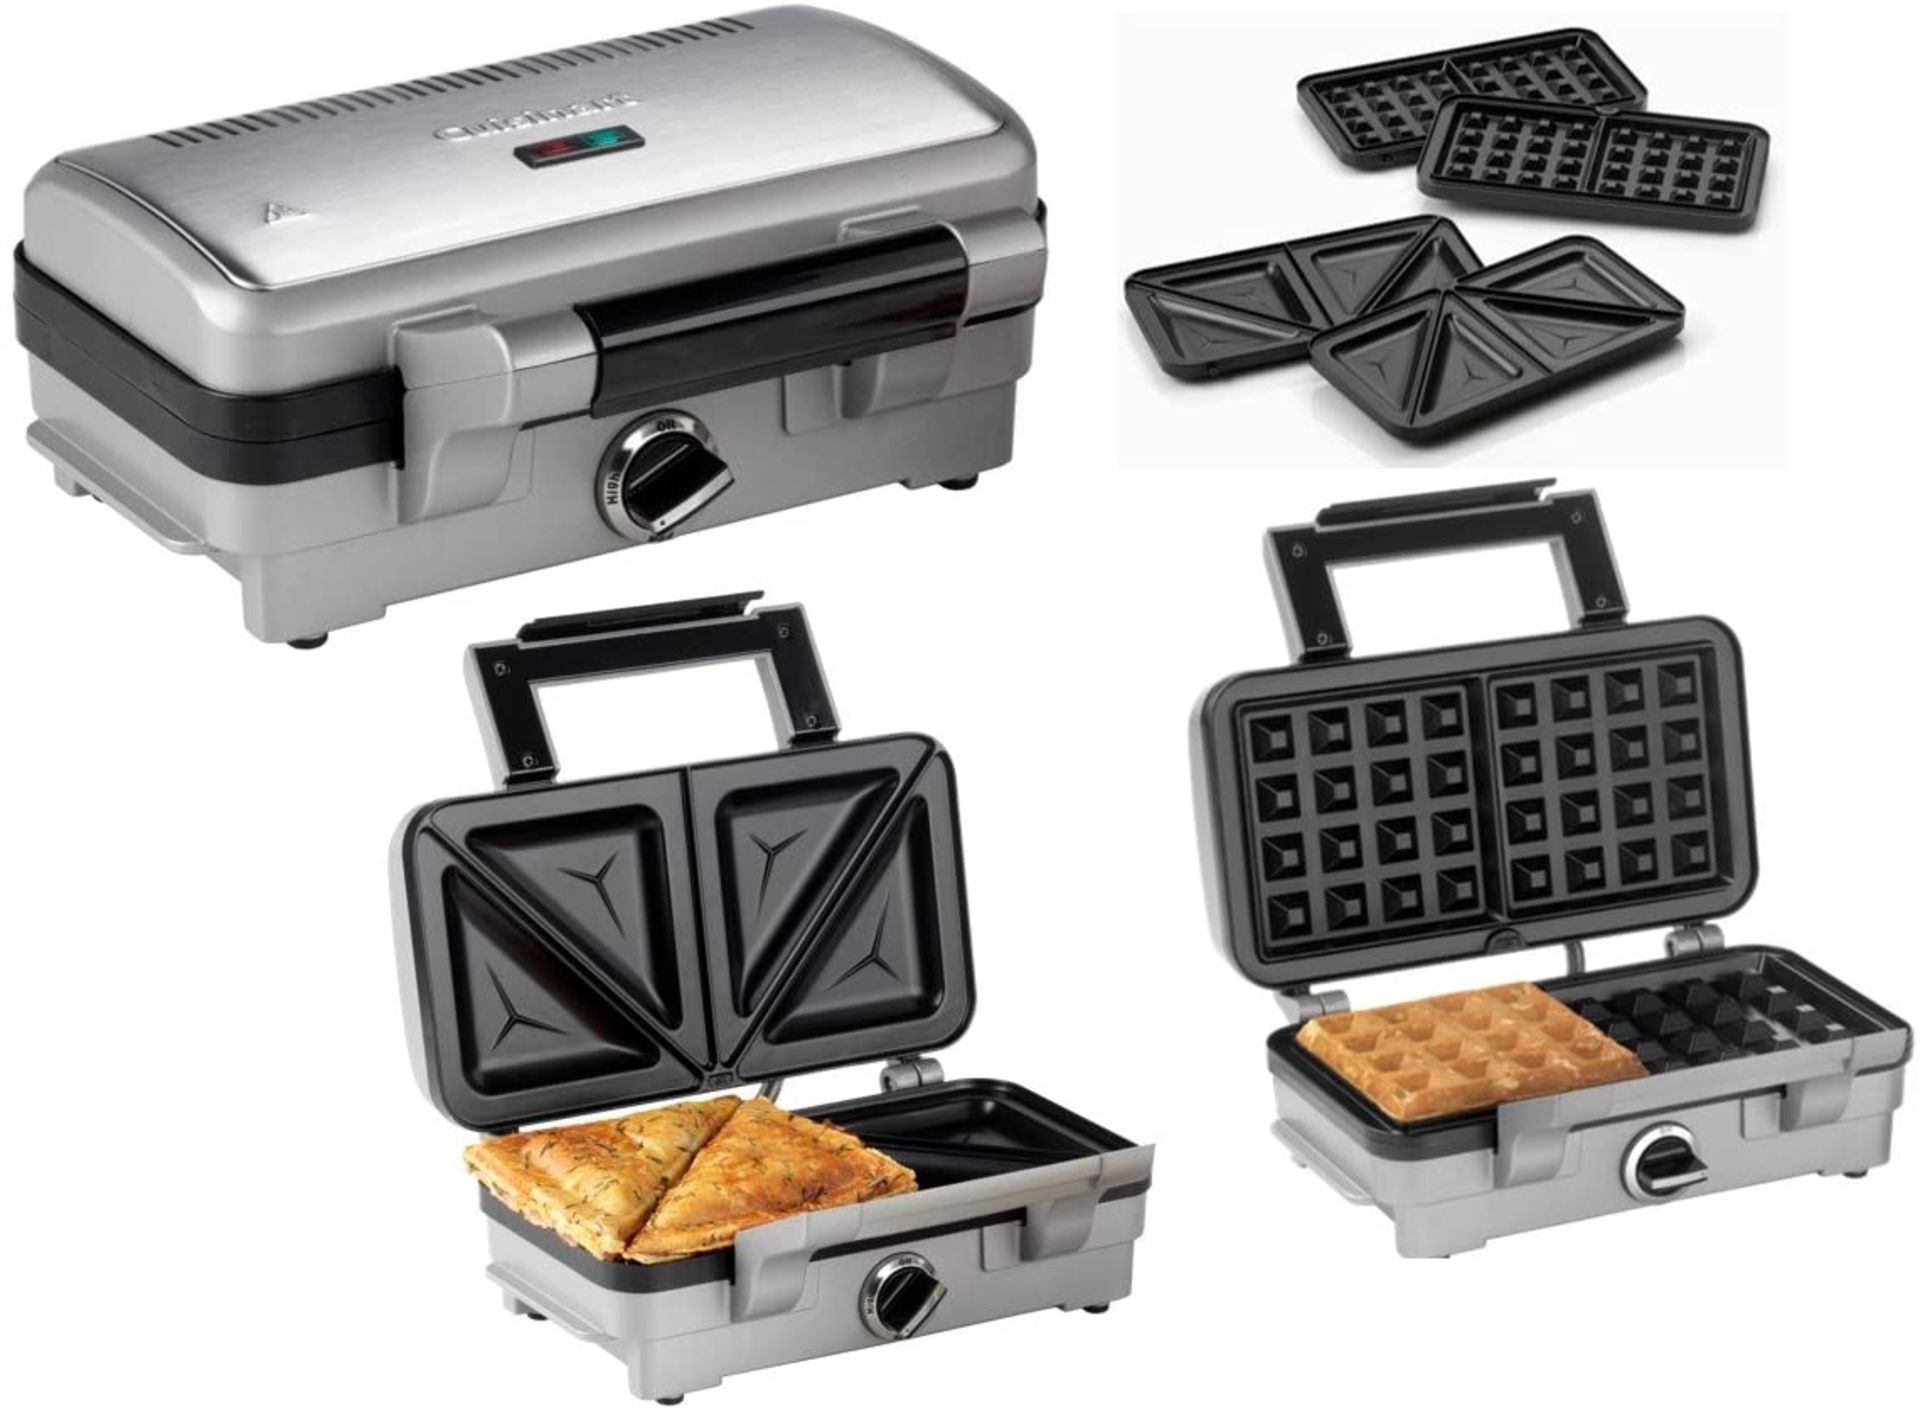 (M61) Cuisinart 2-in-1 Sandwich and Waffle Maker, 1000 W - Silver Extra large sandwich plates w... - Image 2 of 3